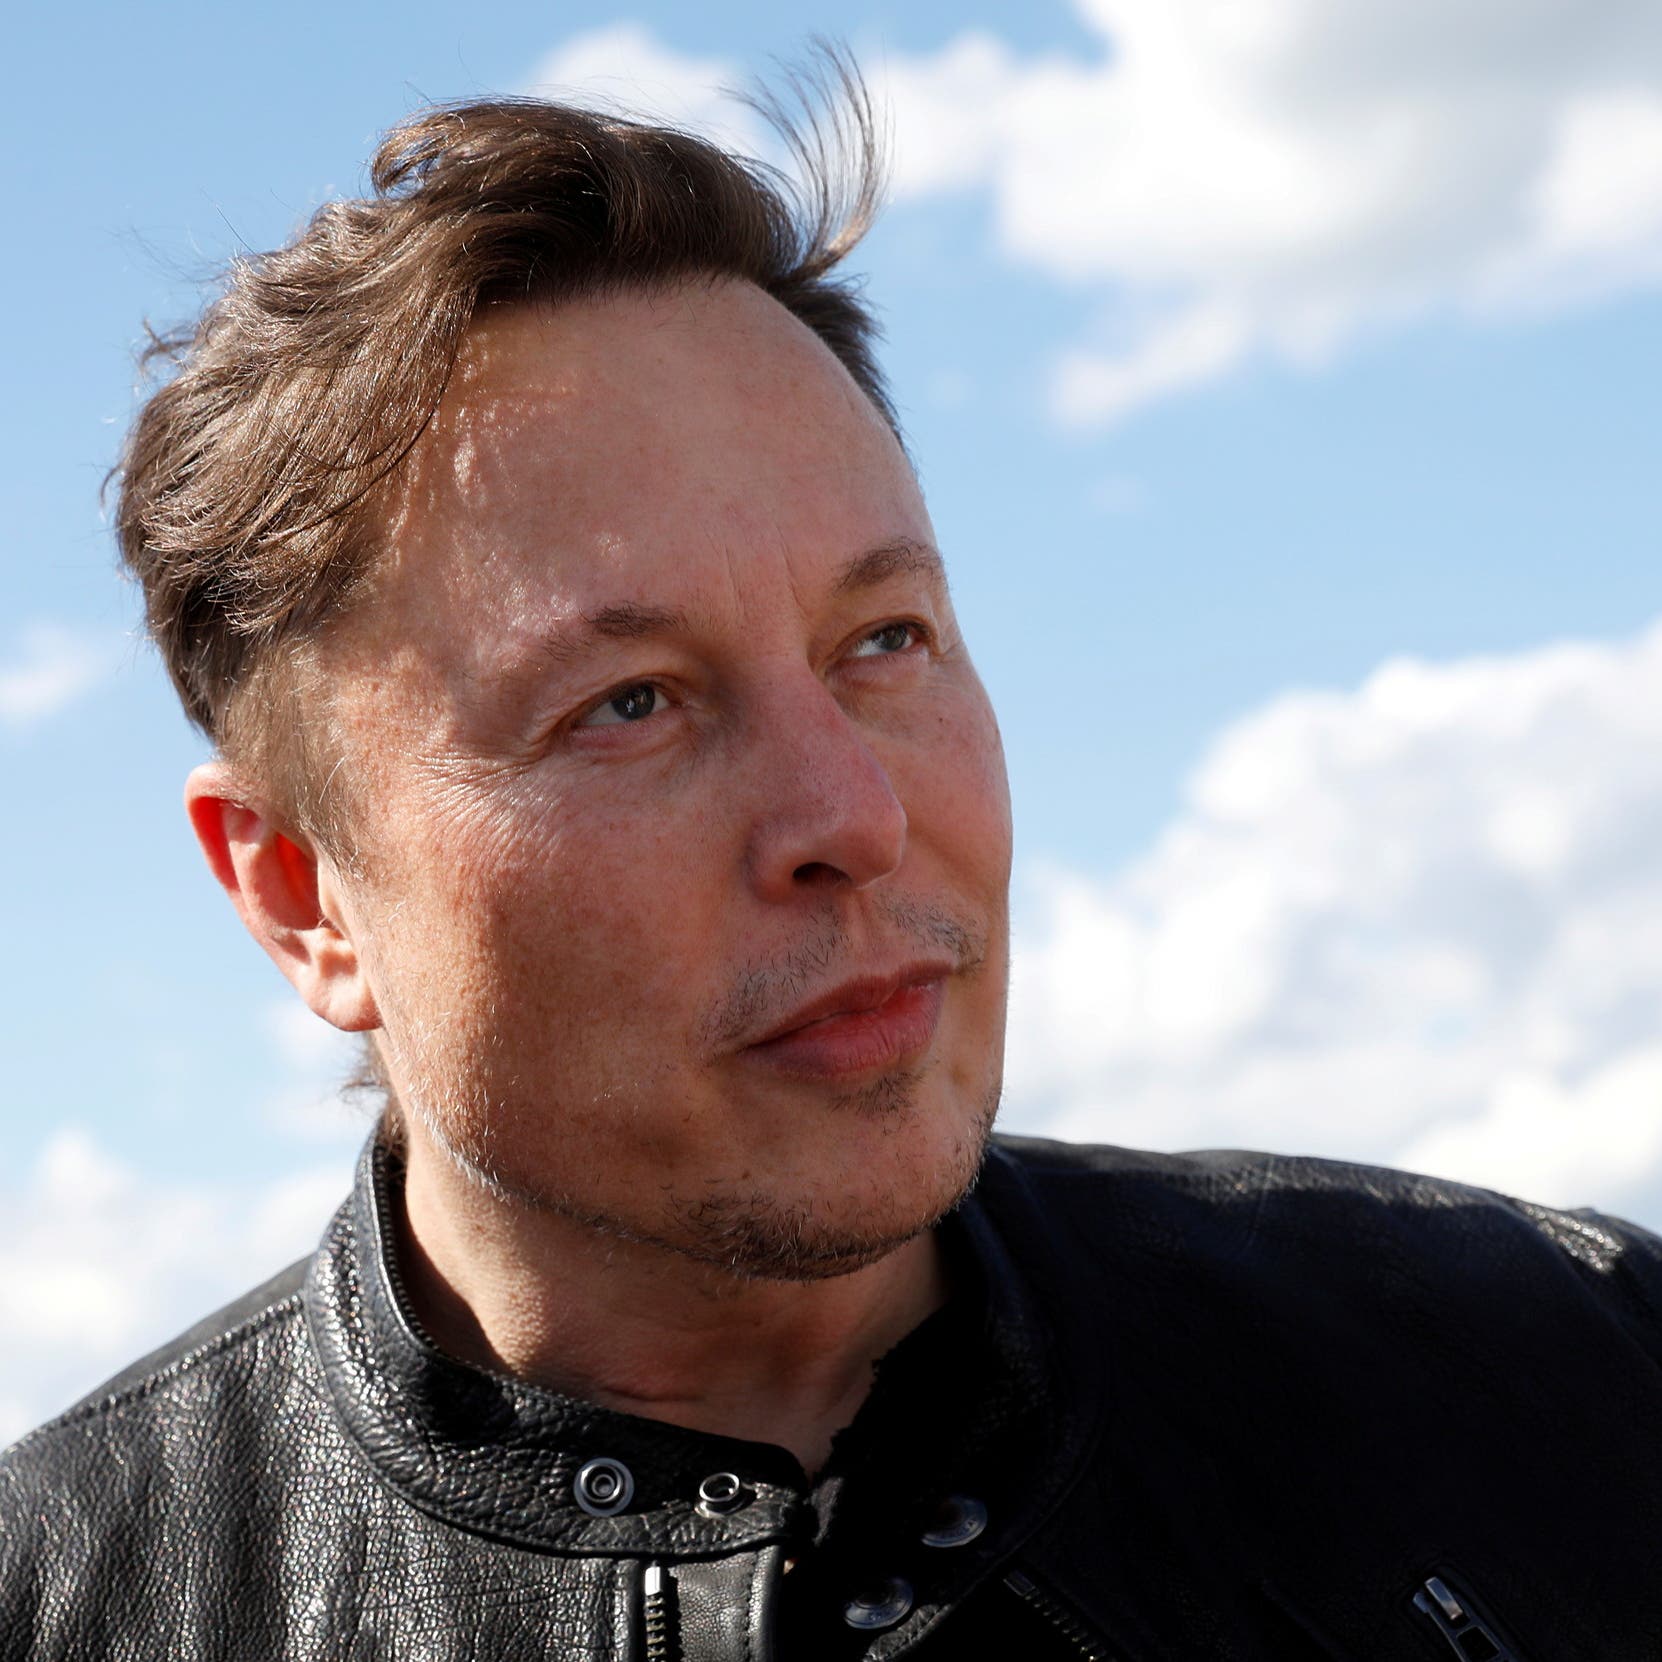 Elon Musk could become the world's first trillionaire thanks to SpaceX